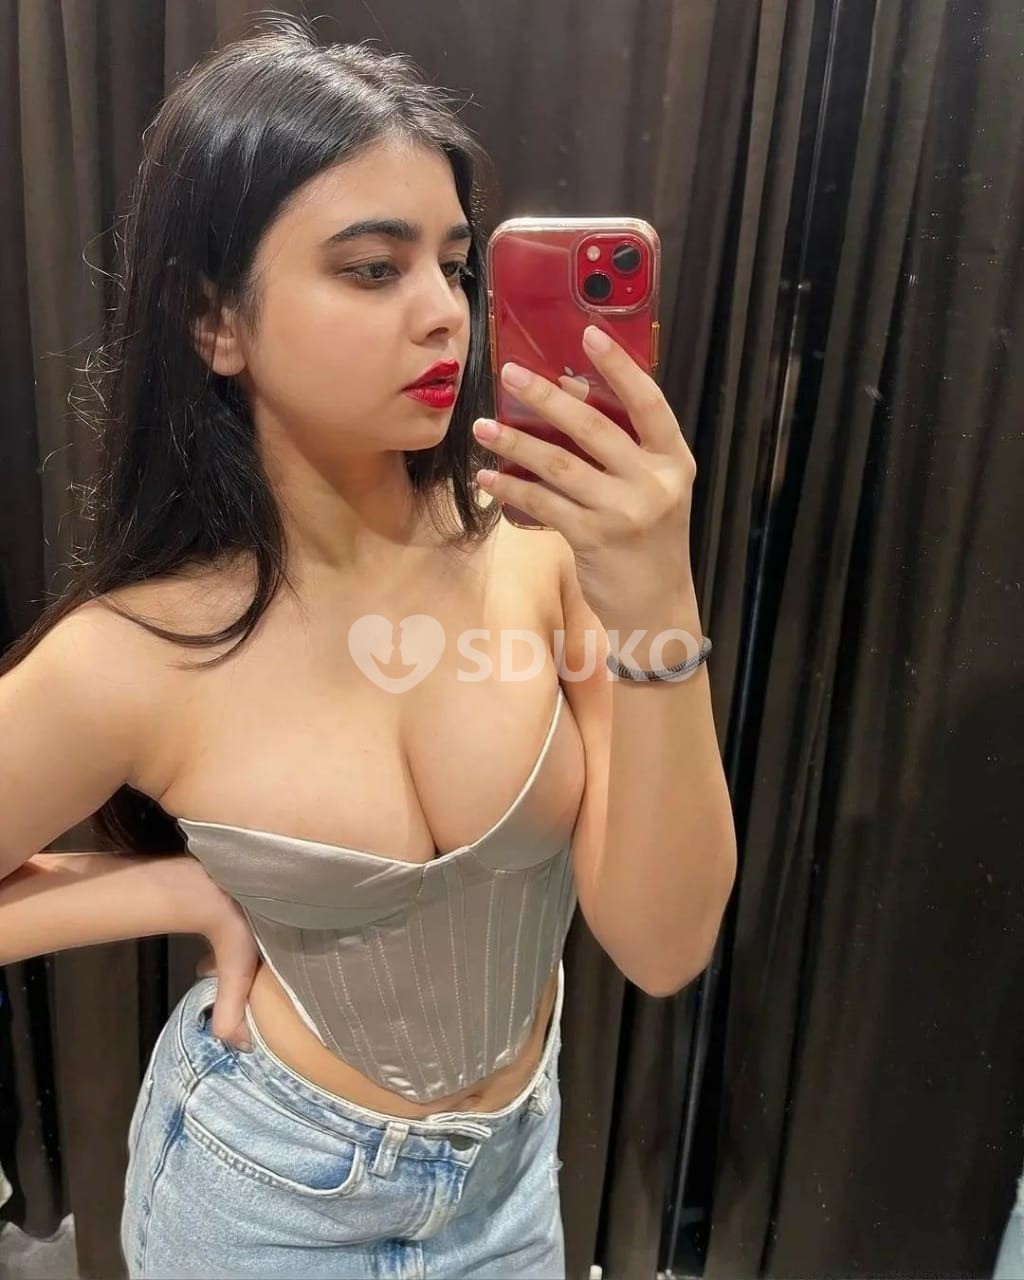 MADURAI IN VIP BEST CALL ME PAYAL LOW PRICE UNLIMITED SHOOT 100% GENUINE SEXY VIP CALL GIRLS ARE PROVIDED SECURE SERVICE